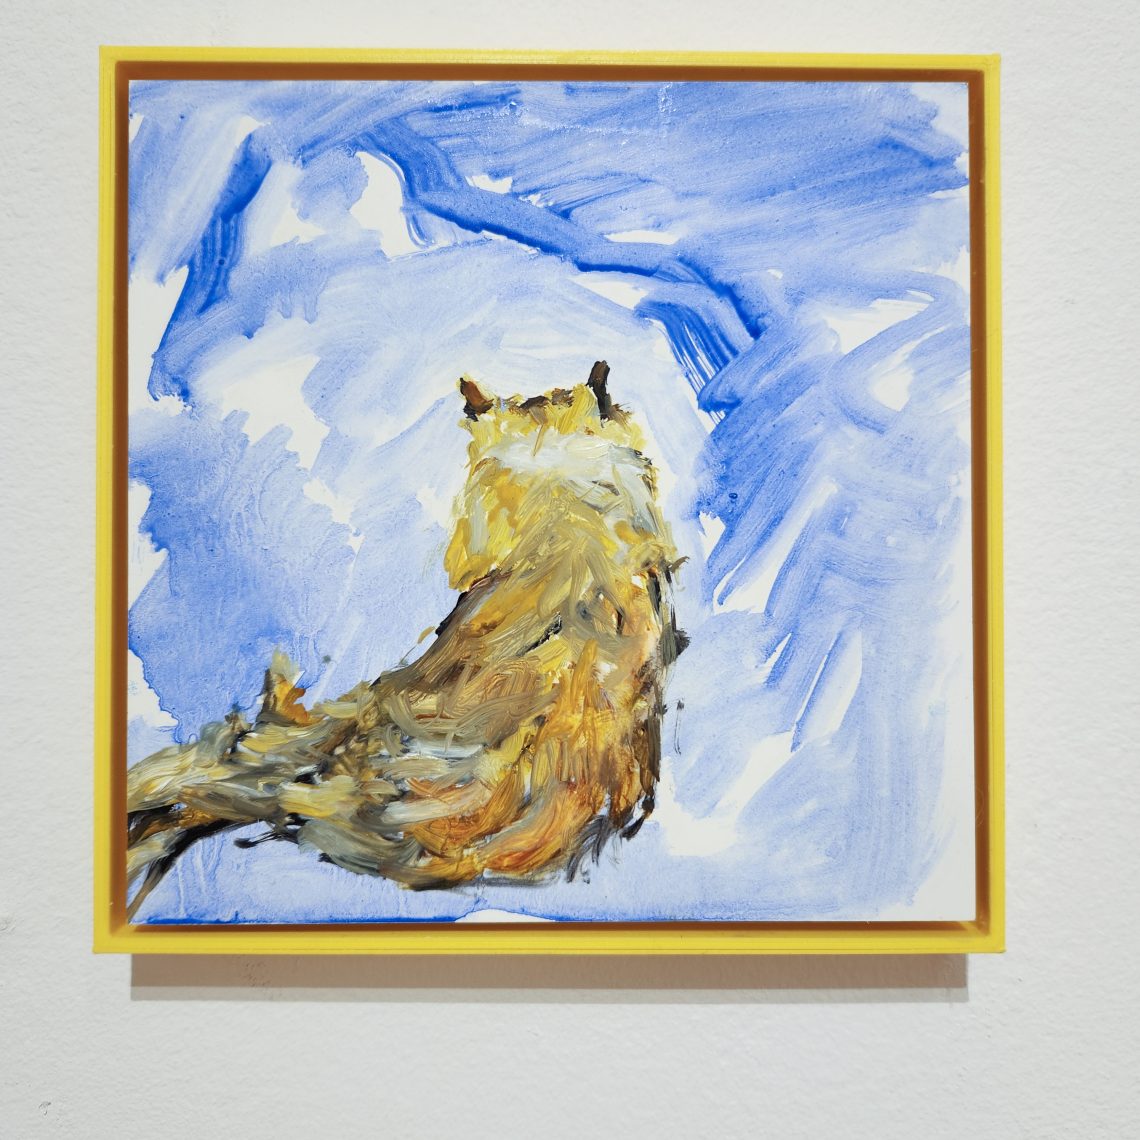 Kristin Golden "Glorfindel Thinking"
2022. Oil paint, 6 ½ in. x 6 ½ in. Part of the "2023 Bachelor of Fine Arts and Bachelor of Arts Exhibition," University of Southern Maine Art Gallery.